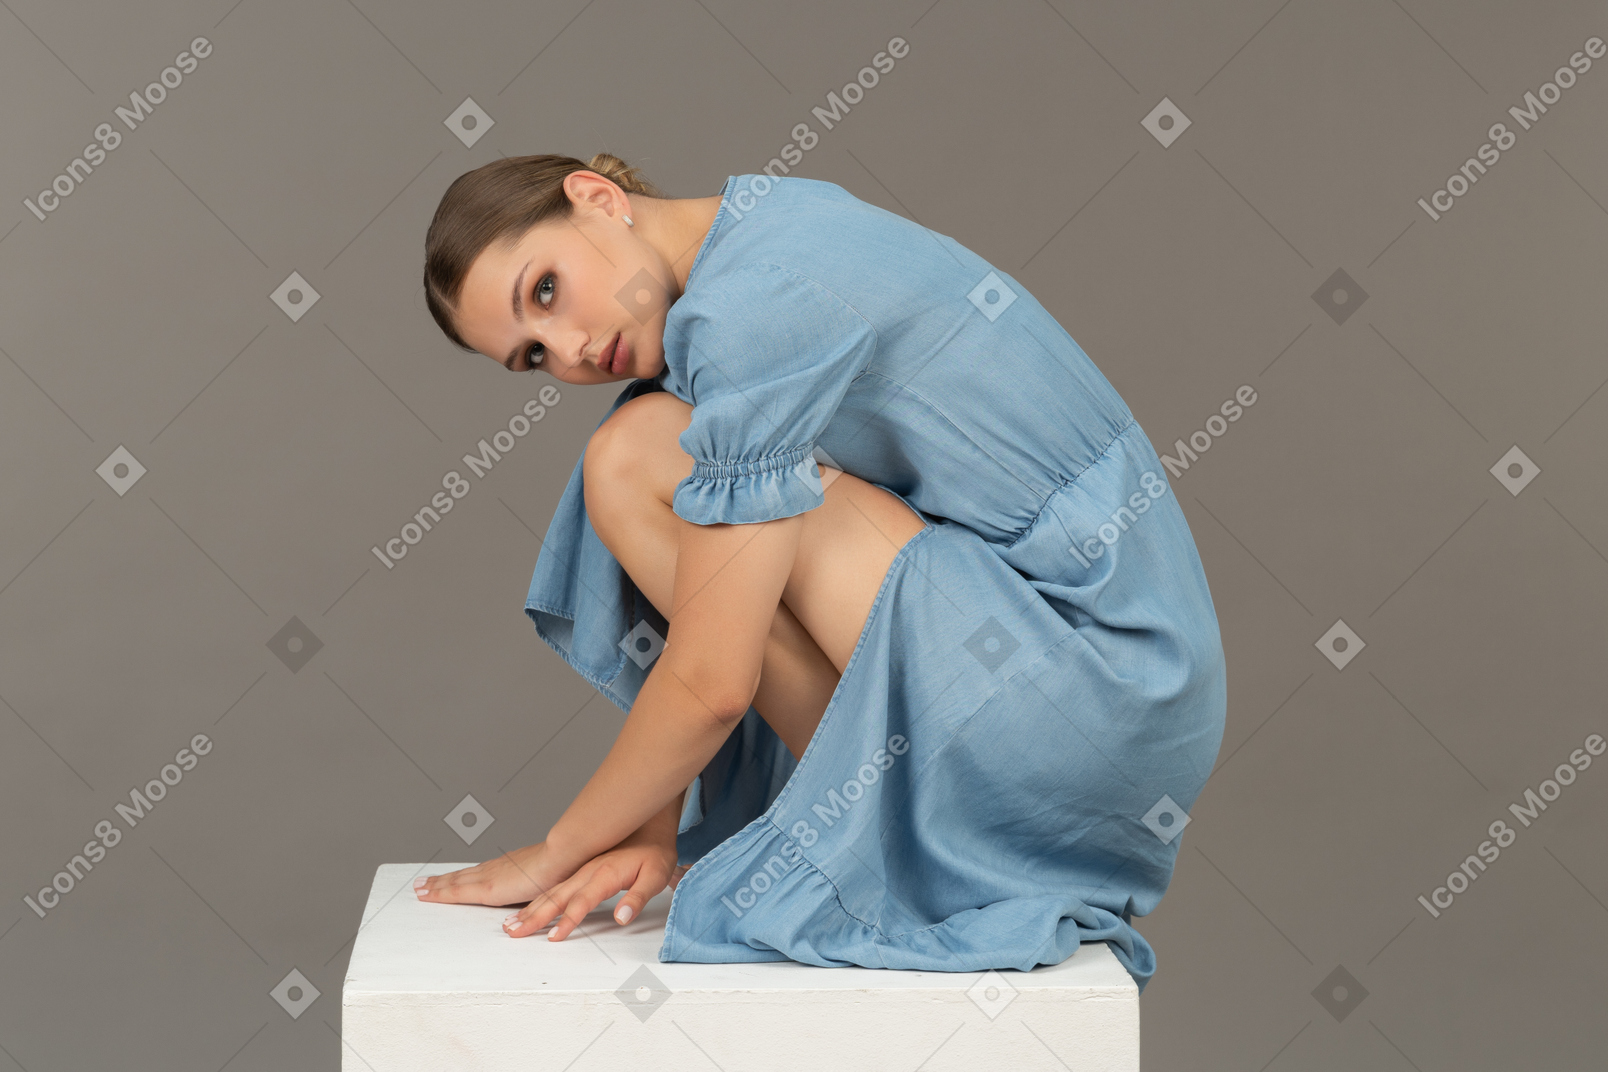 Side view of young woman squatting on cube